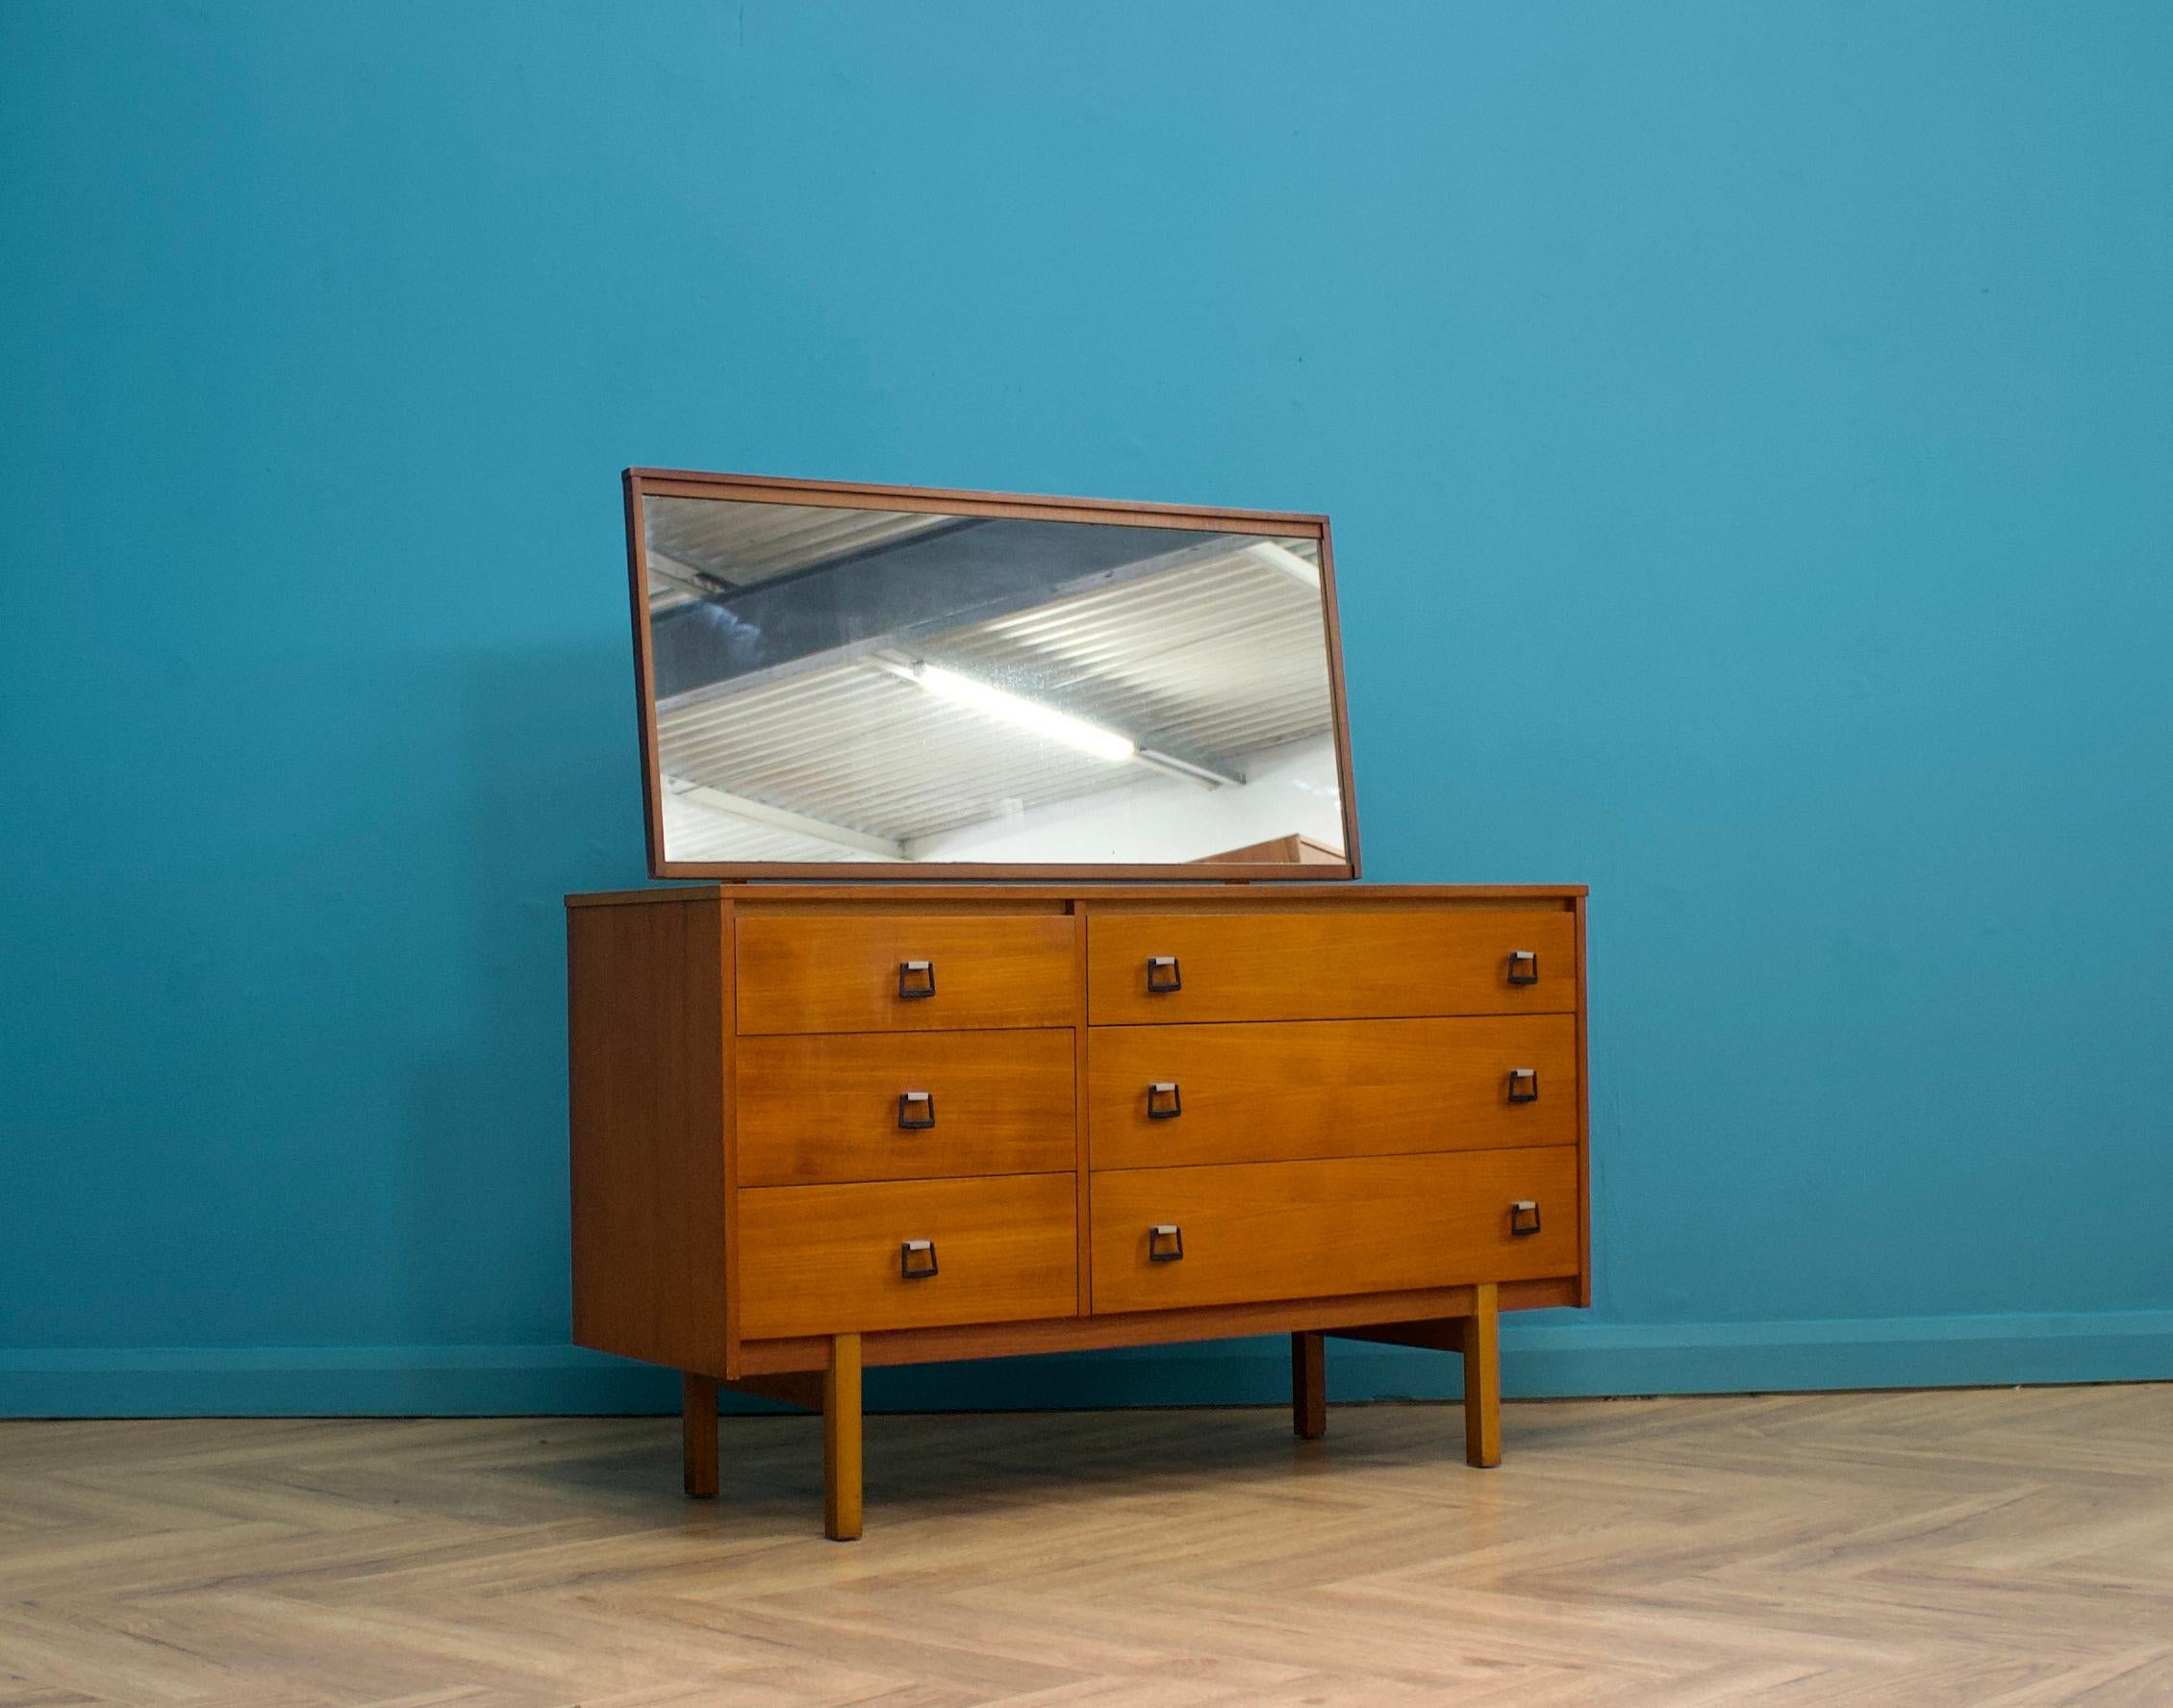 A teak chest of drawers - dressing chest from Symbol, Circa 1960s

It is long and low - so it can be used as a compact sideboard or TV unit (the mirror is easily removed)

Featuring six drawers for plenty of storage

The matching dressing chest is